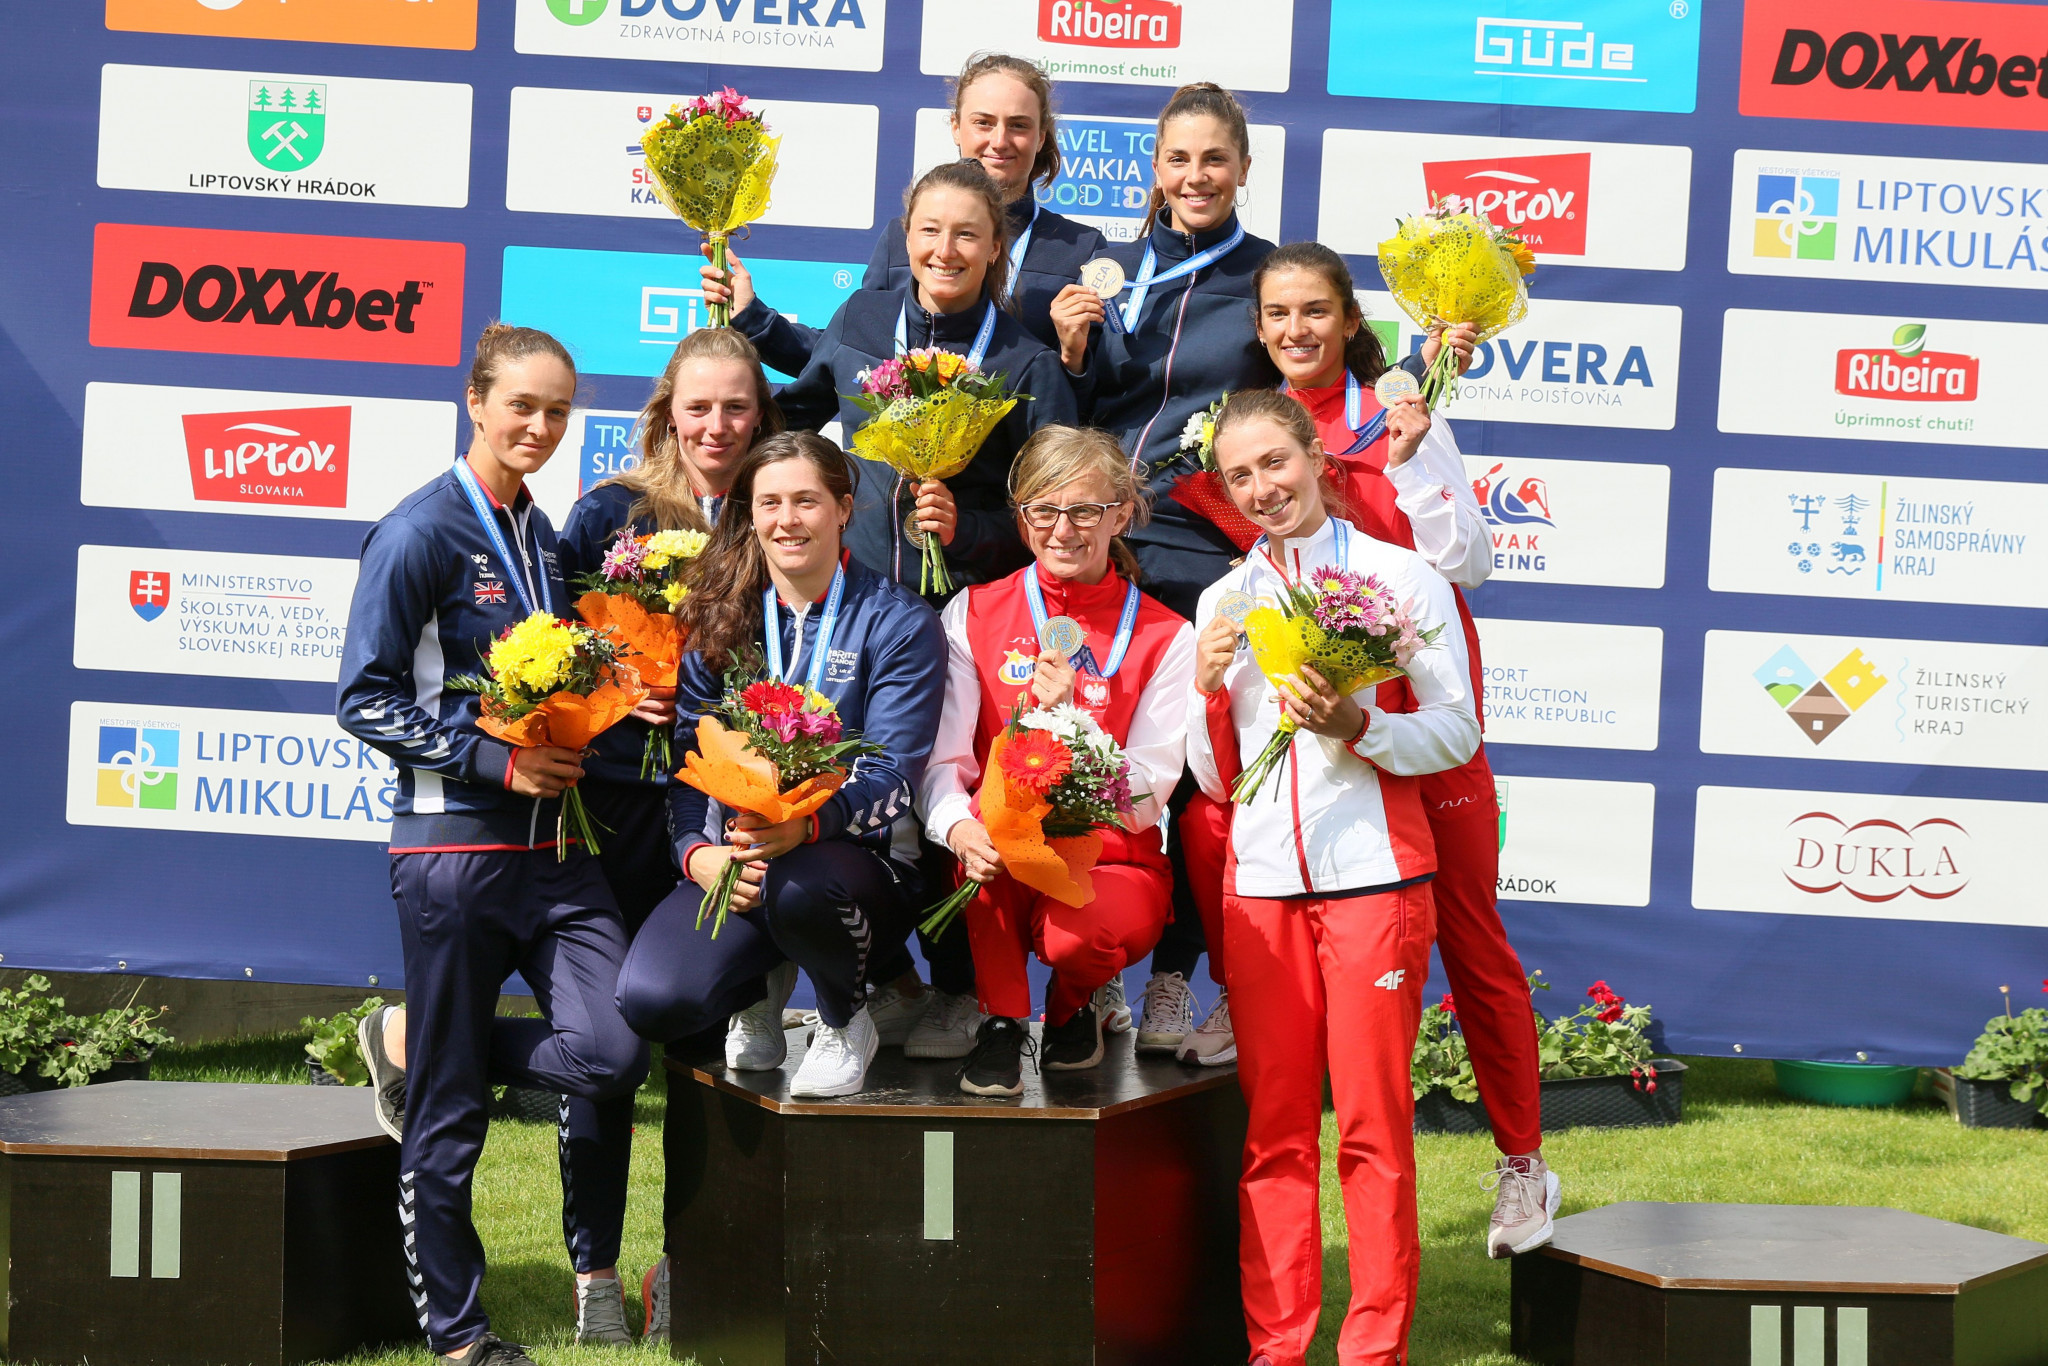 France and Czech Republic earn opening gold in kayak team events at Canoe Slalom European Championships